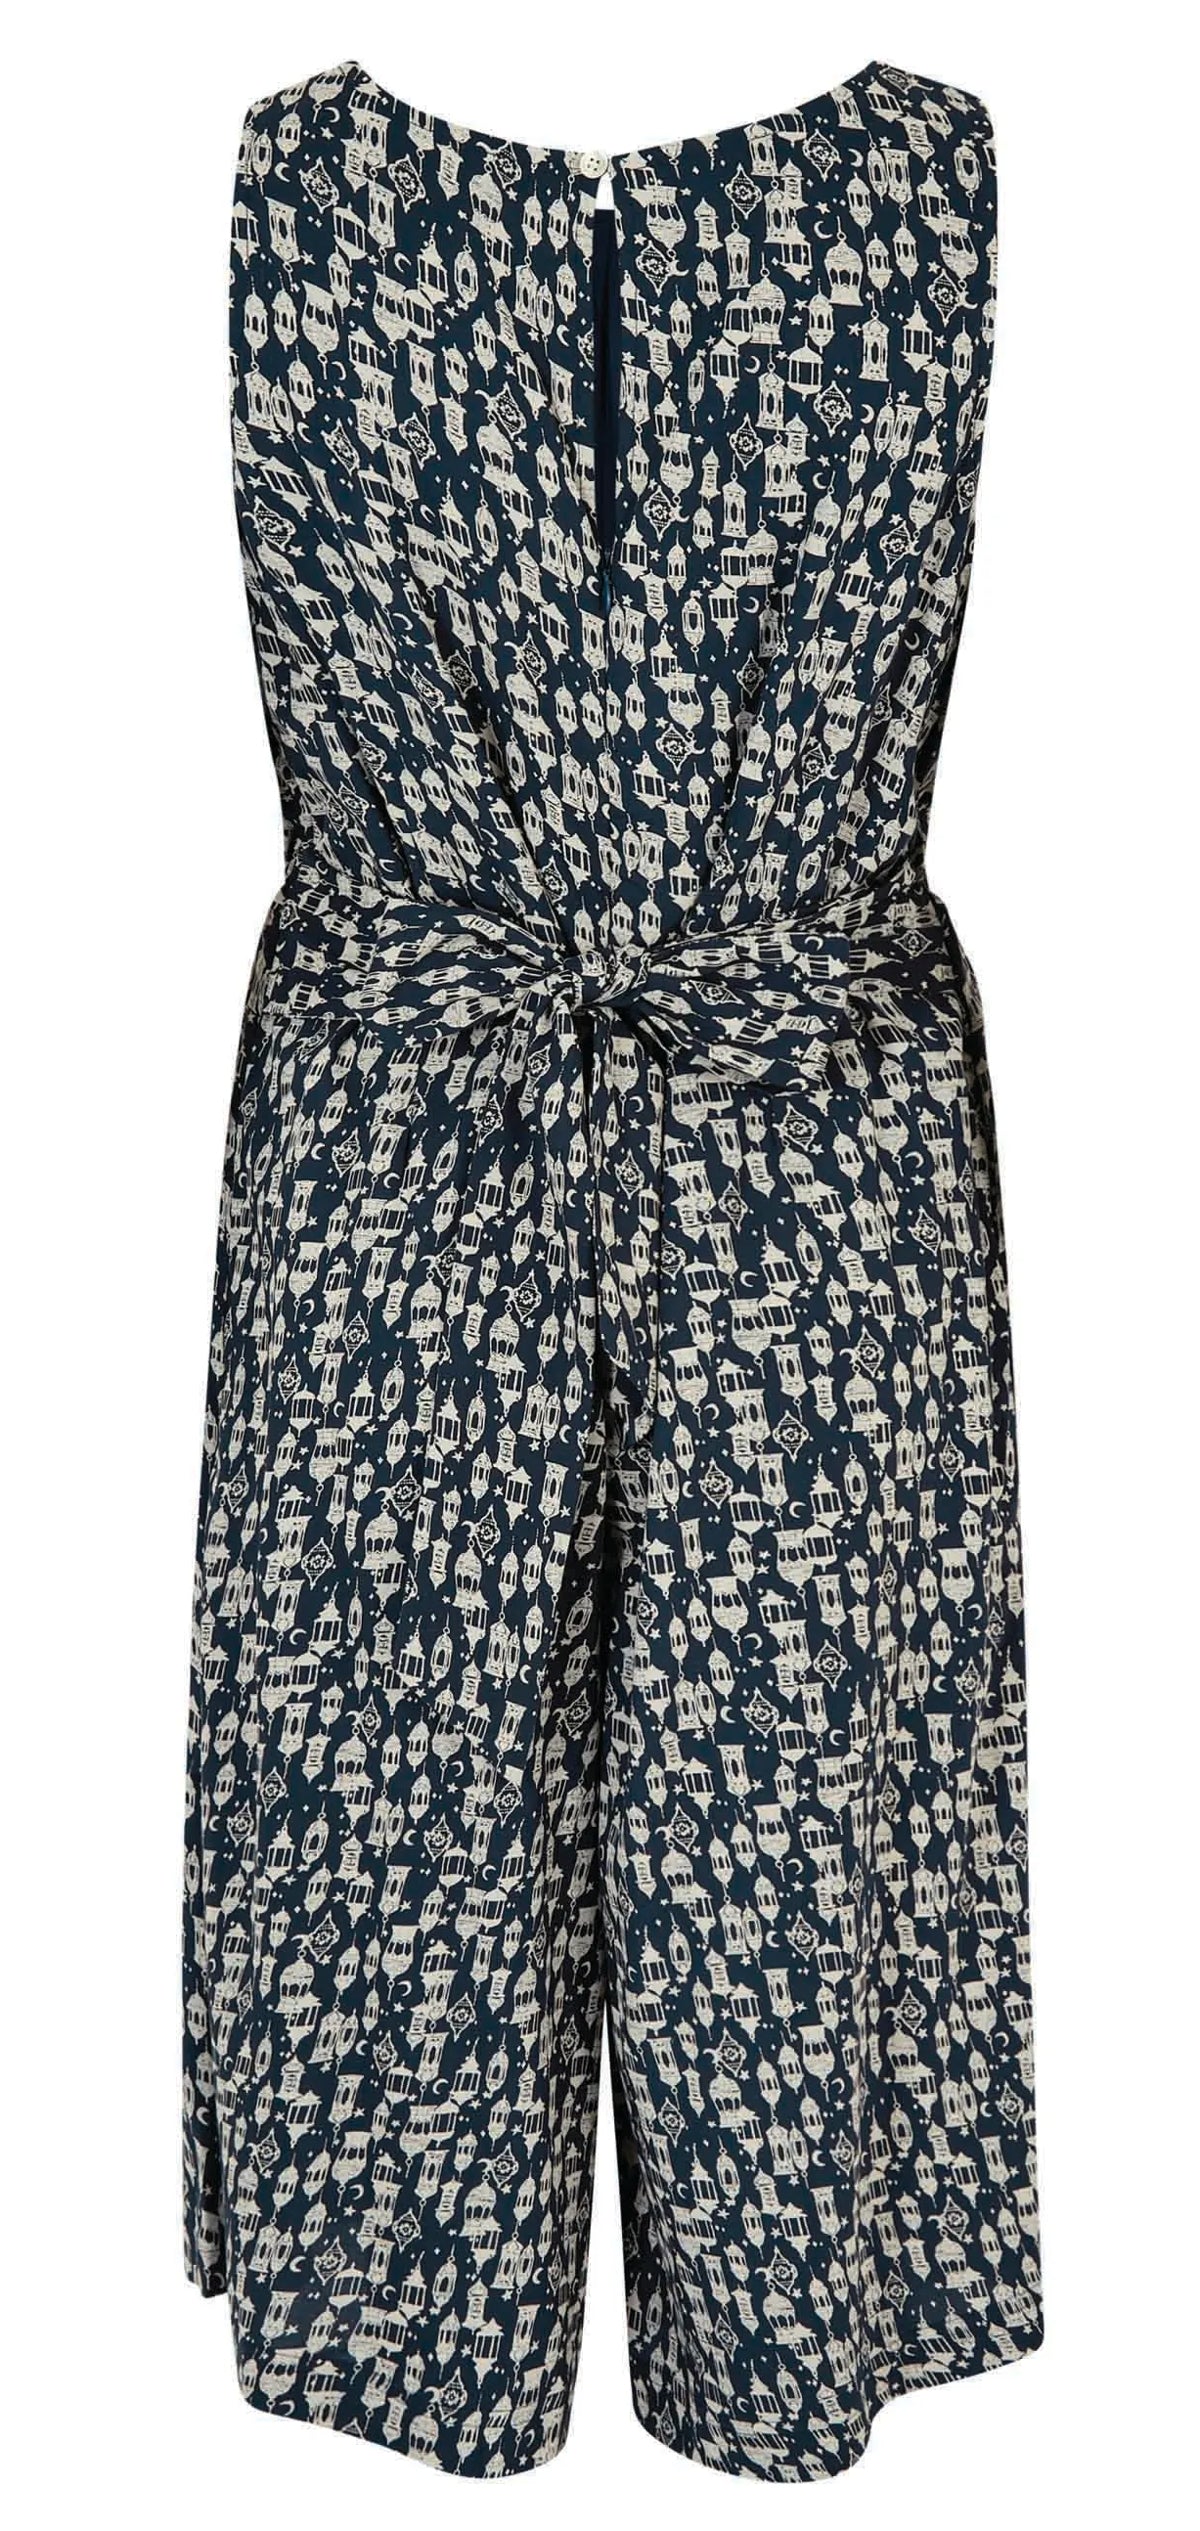 Moroccan style lantern print women's Roxi viscose culotte jumpsuit from Weird Fish in Midnight Navy.